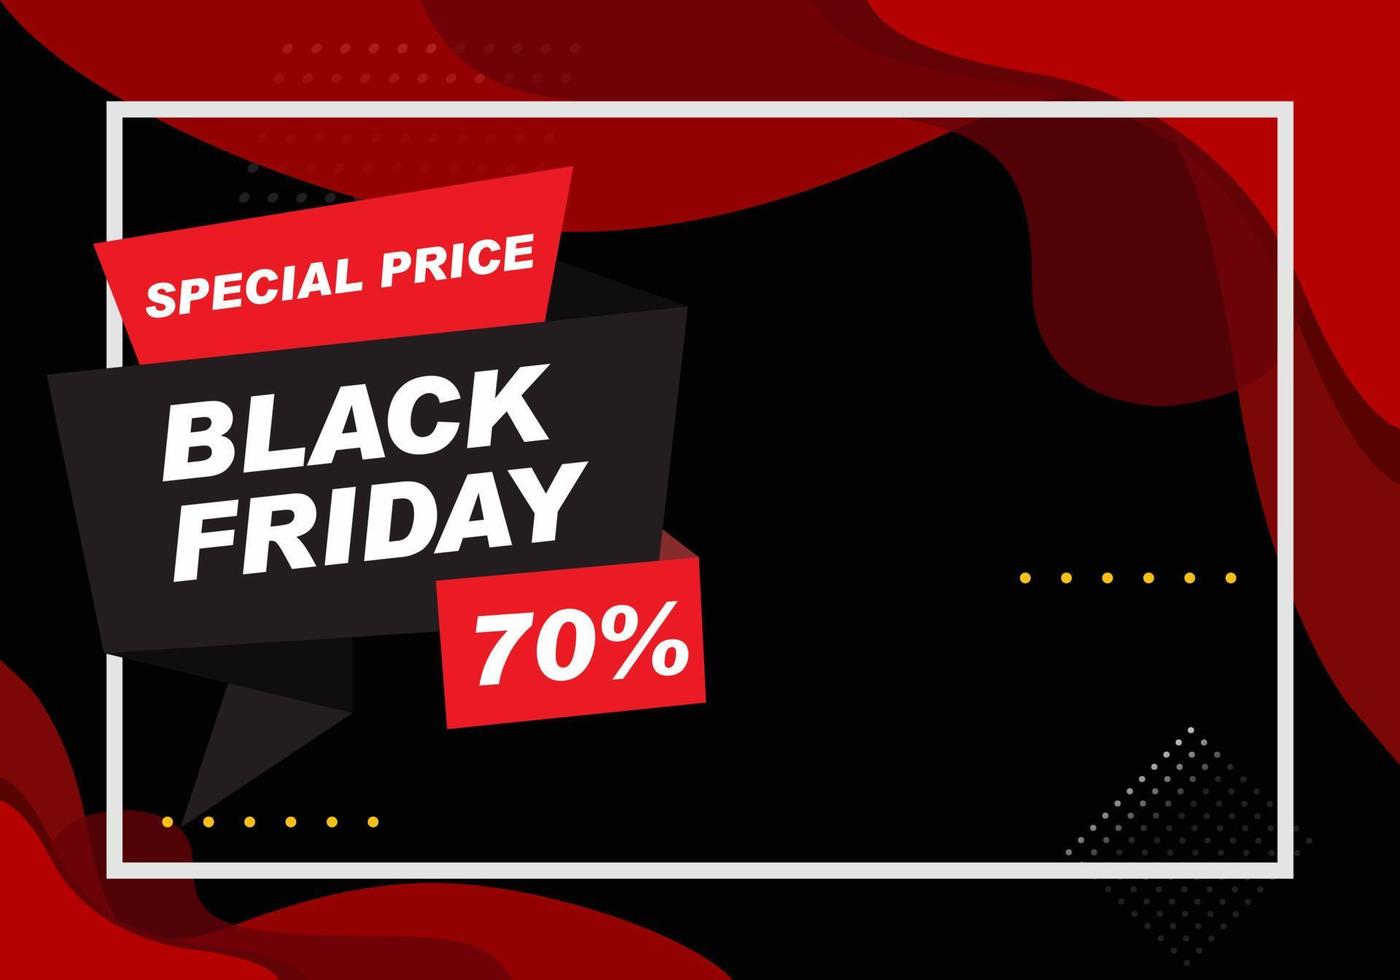 black friday special price with black background vector illustration